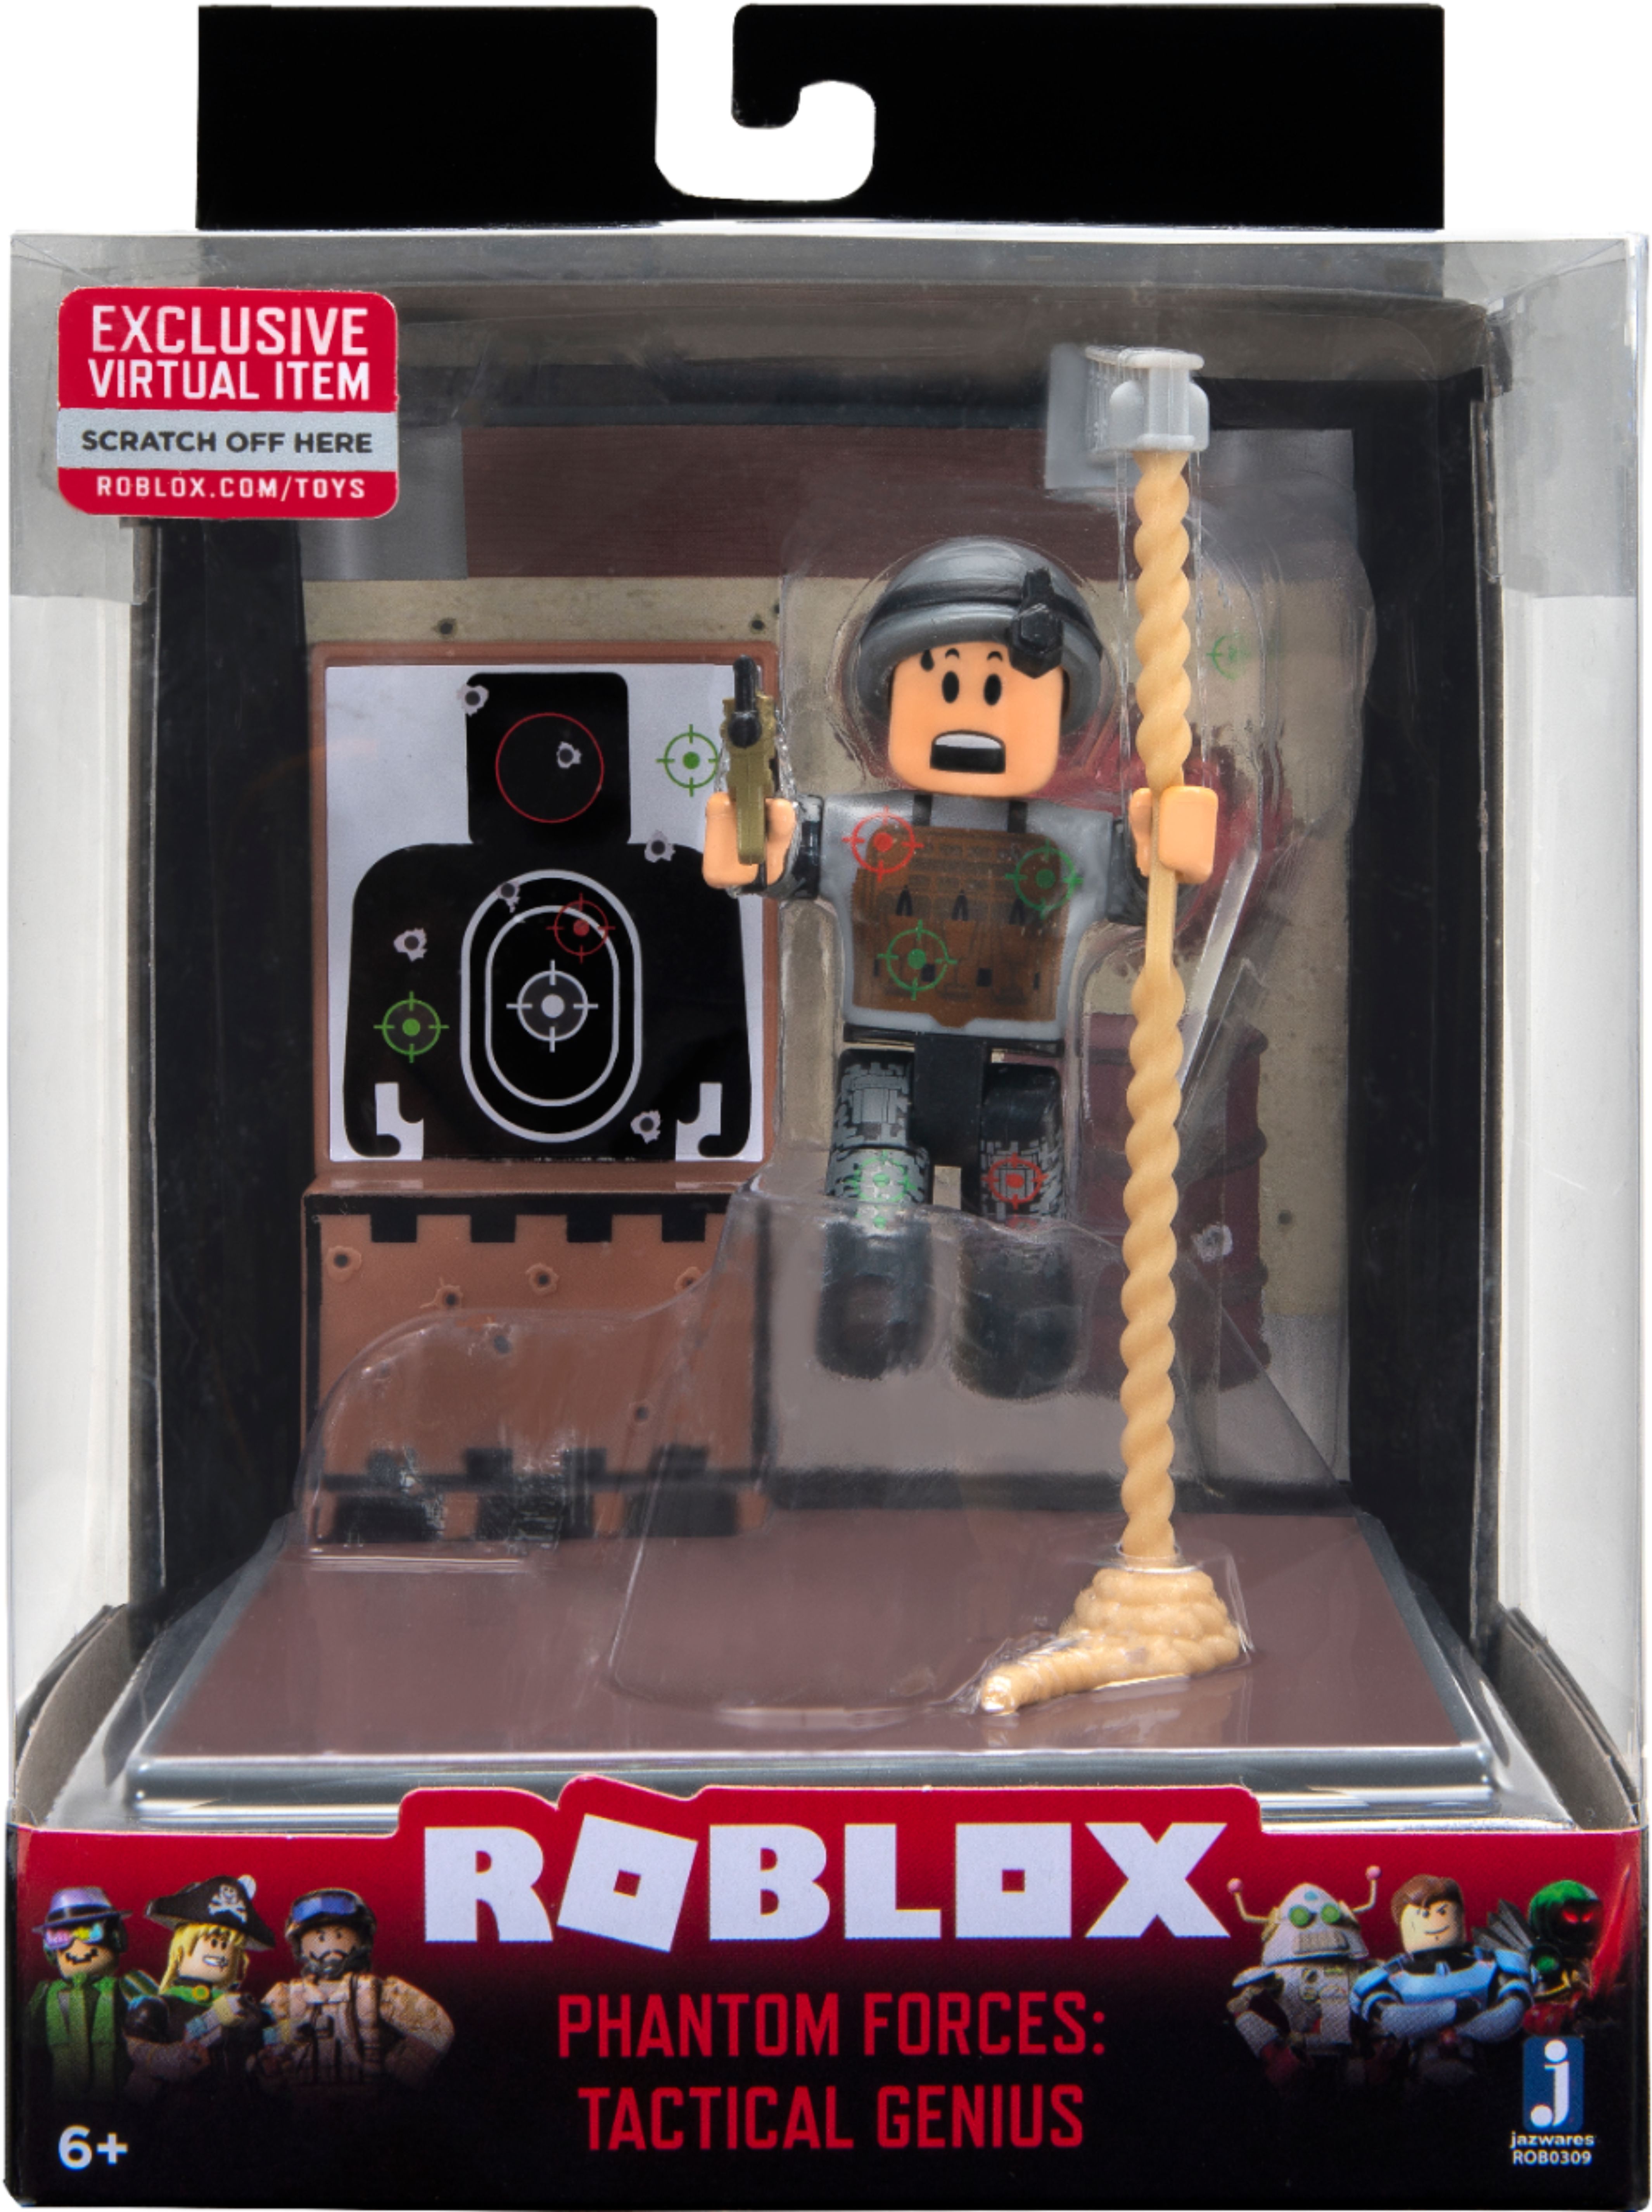 Jazwares Roblox Desktop Series Action Figure Styles May Vary Rob0253 Best Buy - roblox phantom forces account for sale